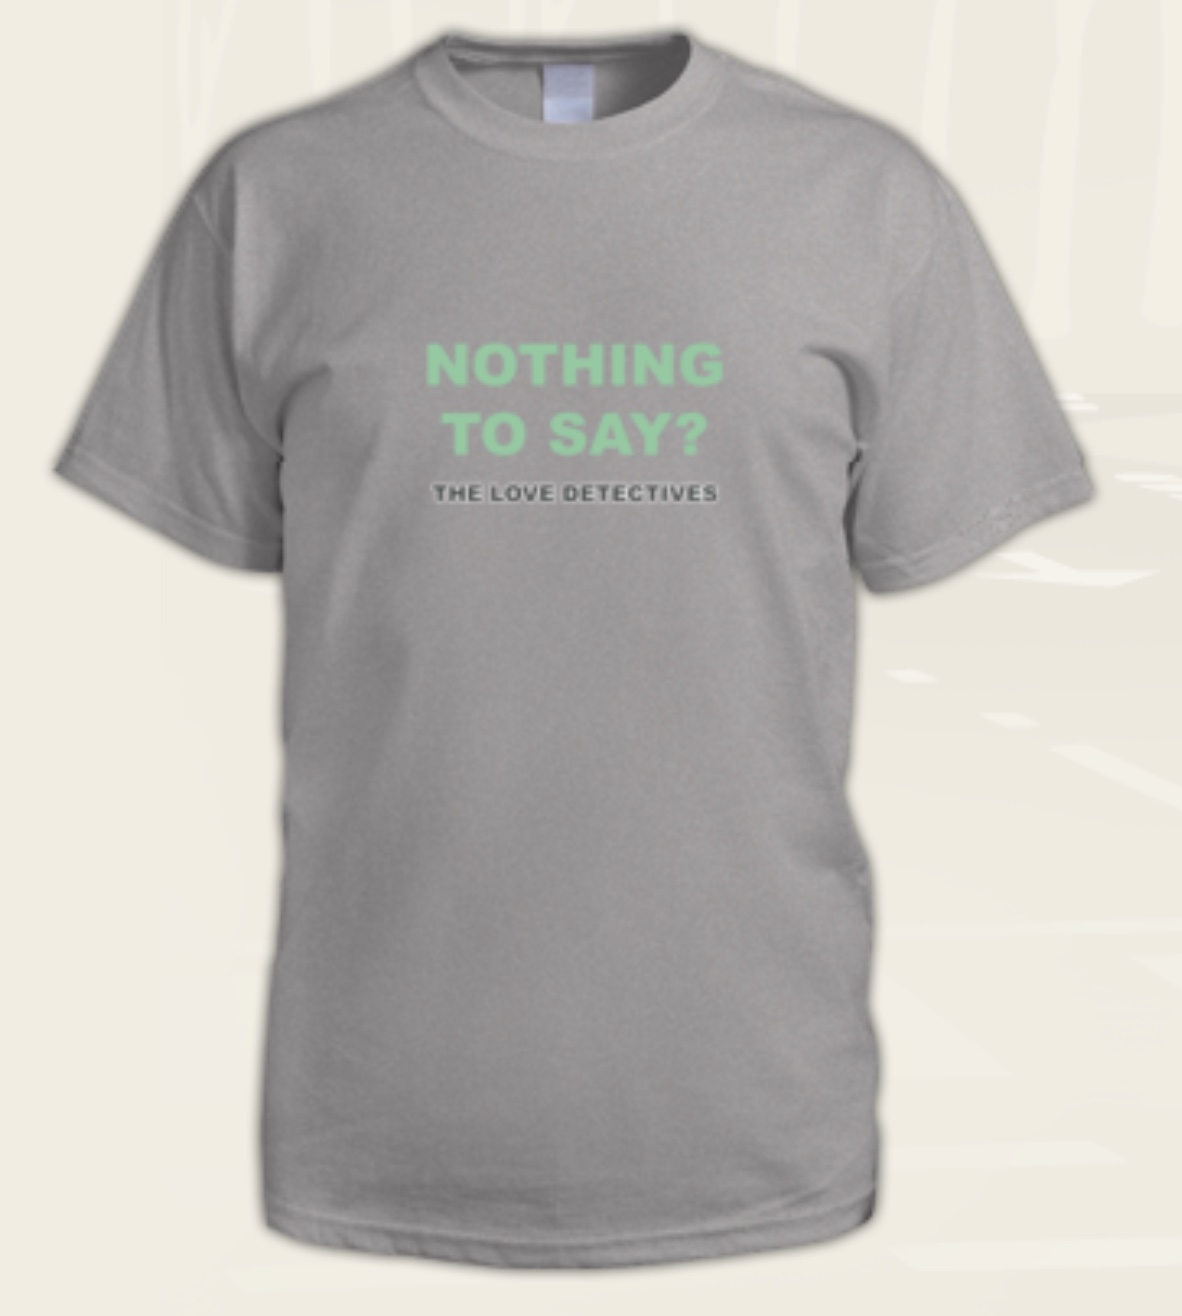 Nothing to Say T shirt.jpeg